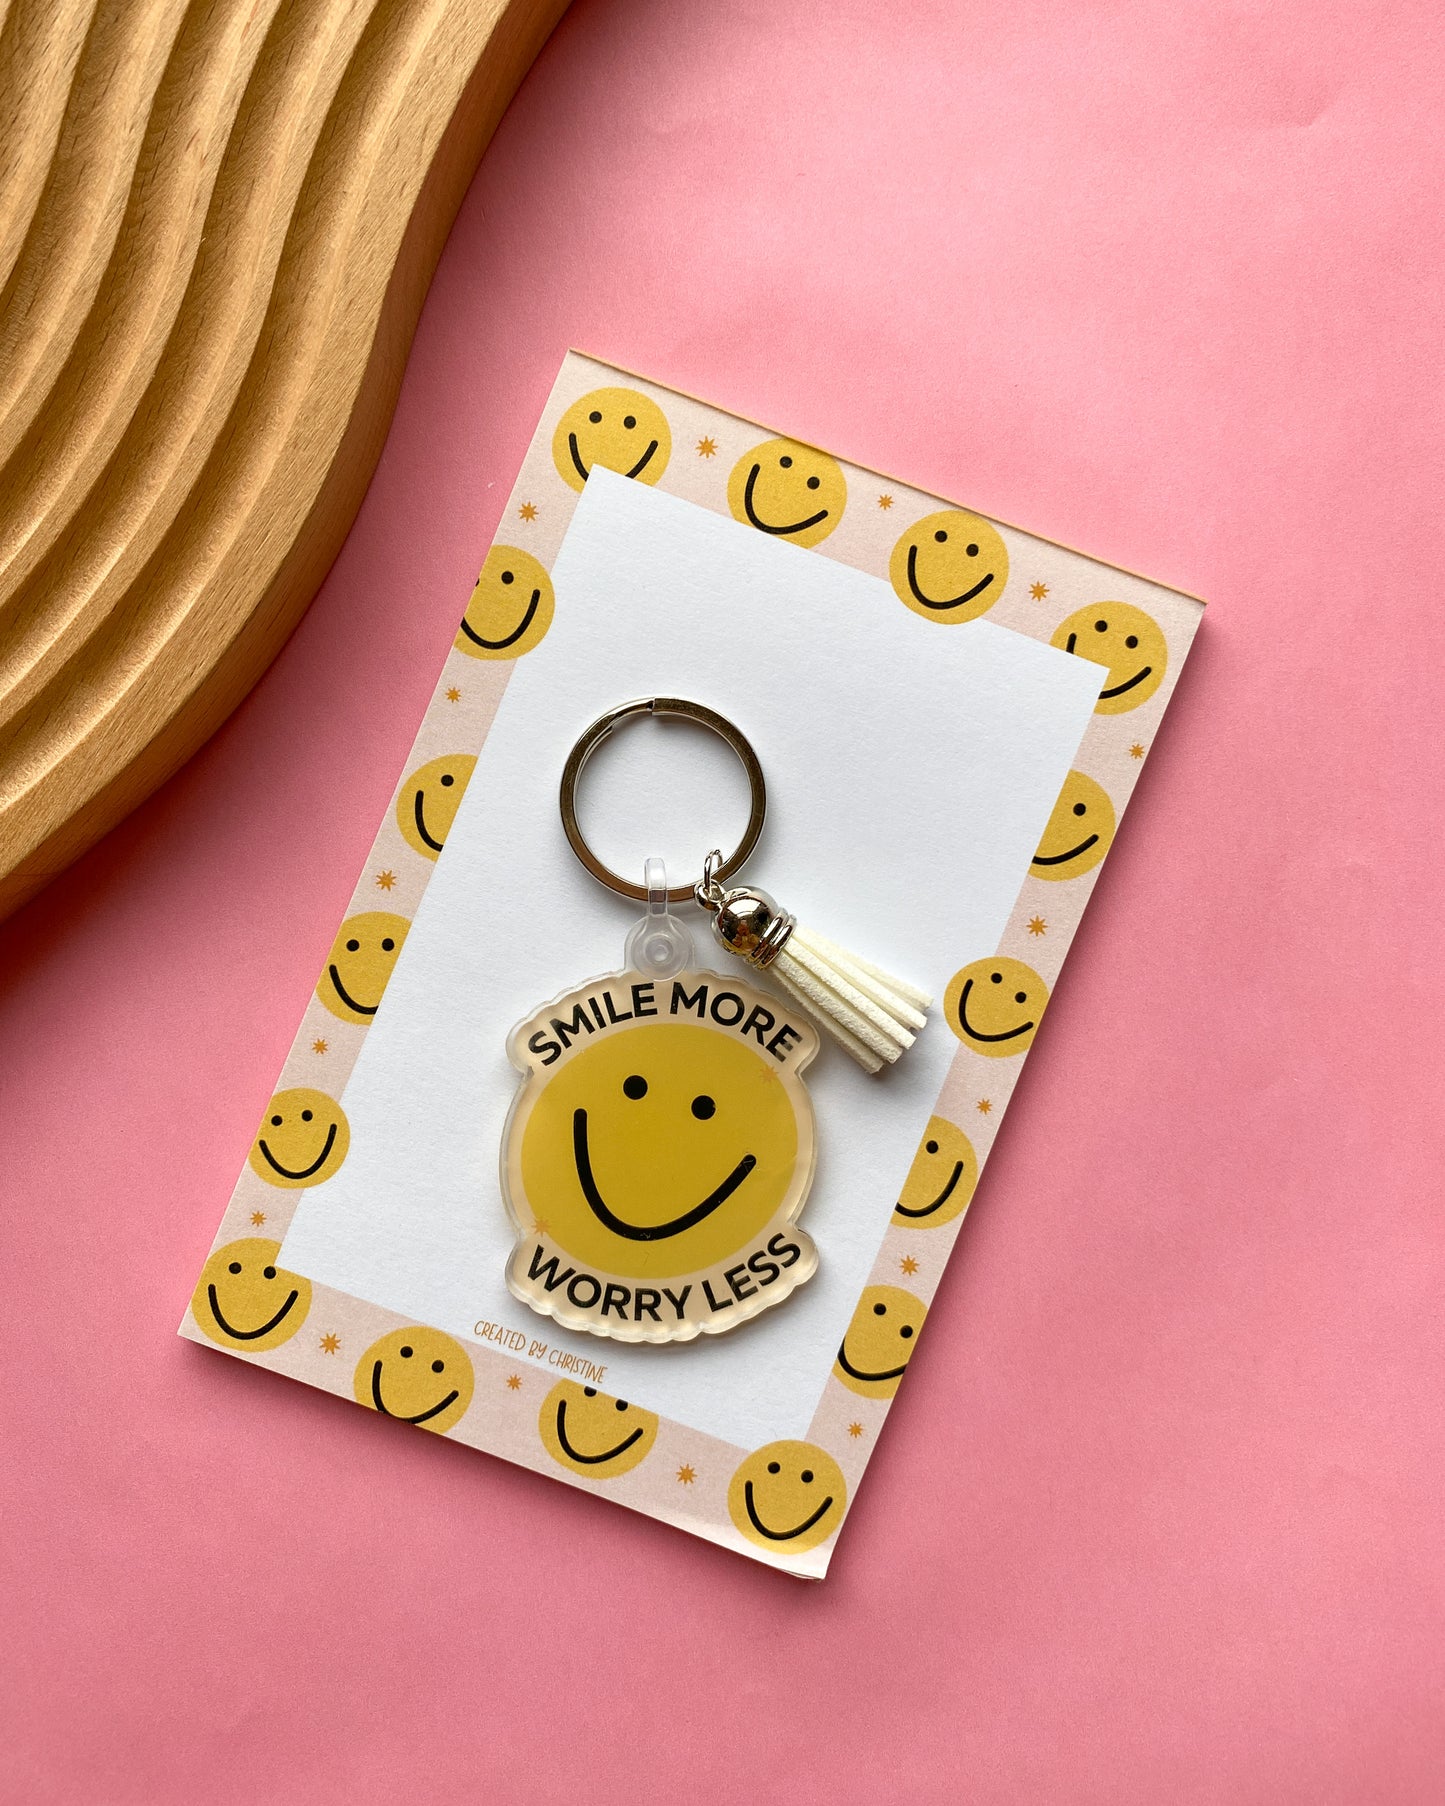 Smile More Worry Less Keychain